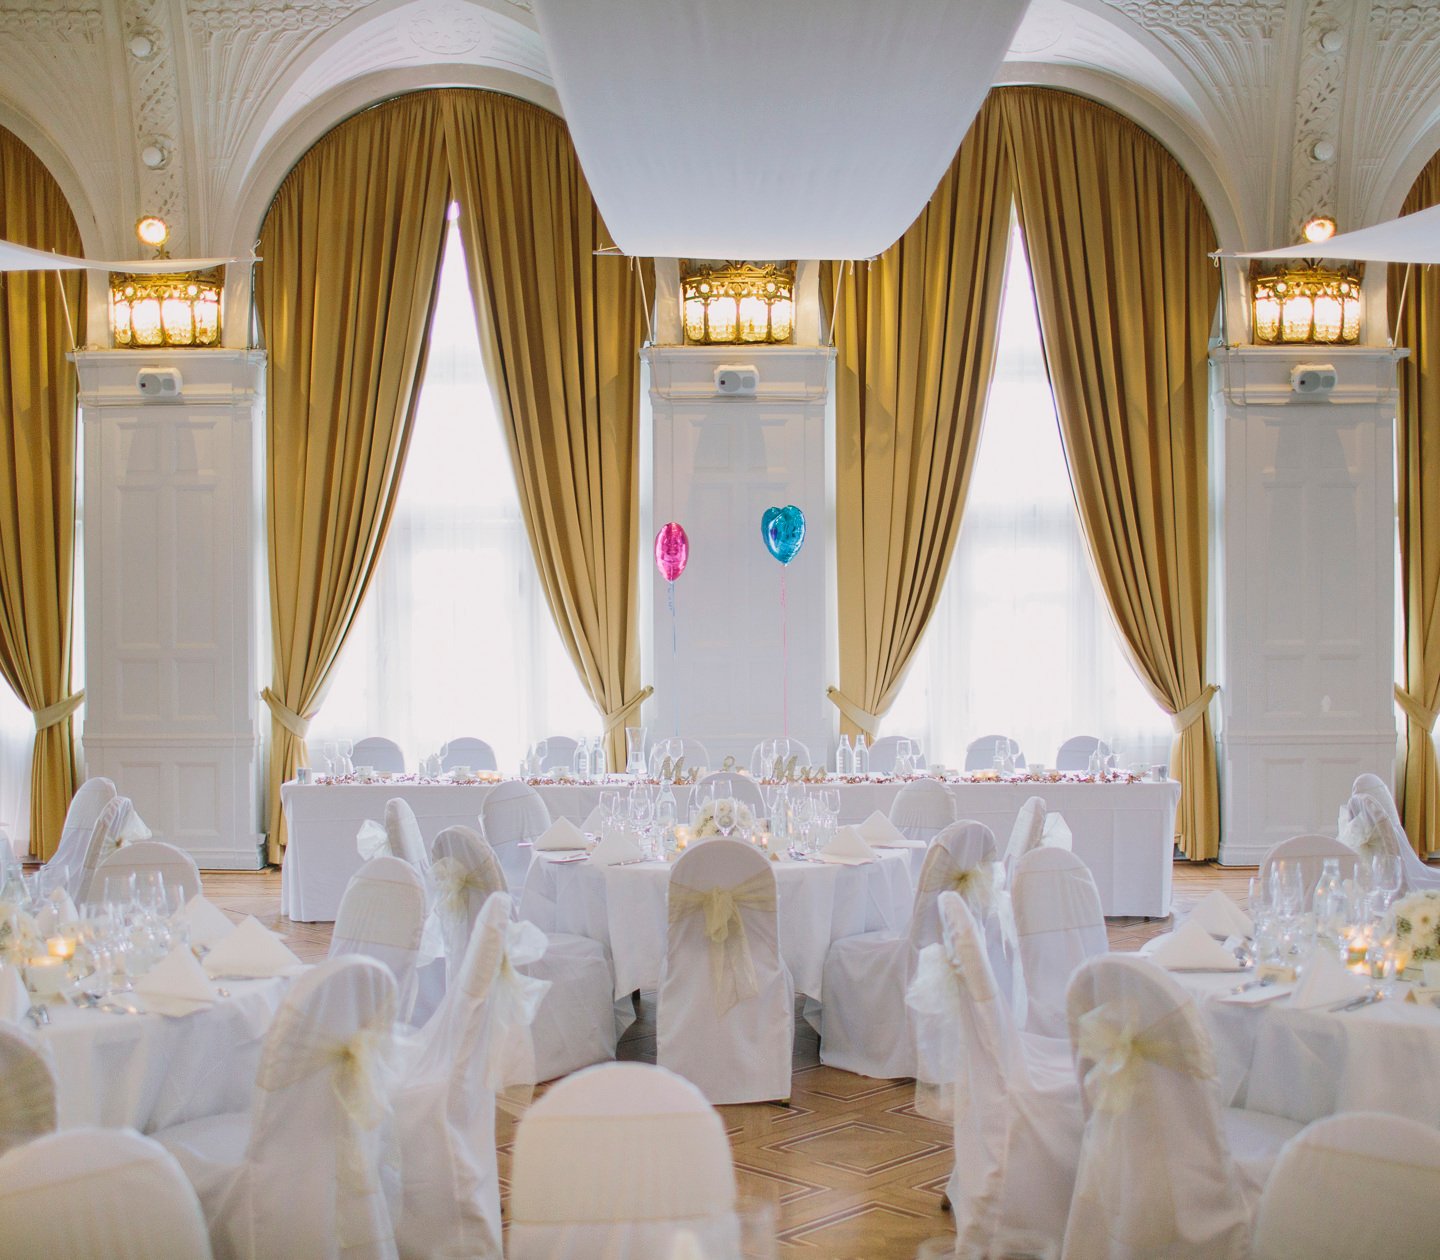 Gorgeous wedding venue with large windows and golden yellow curtains